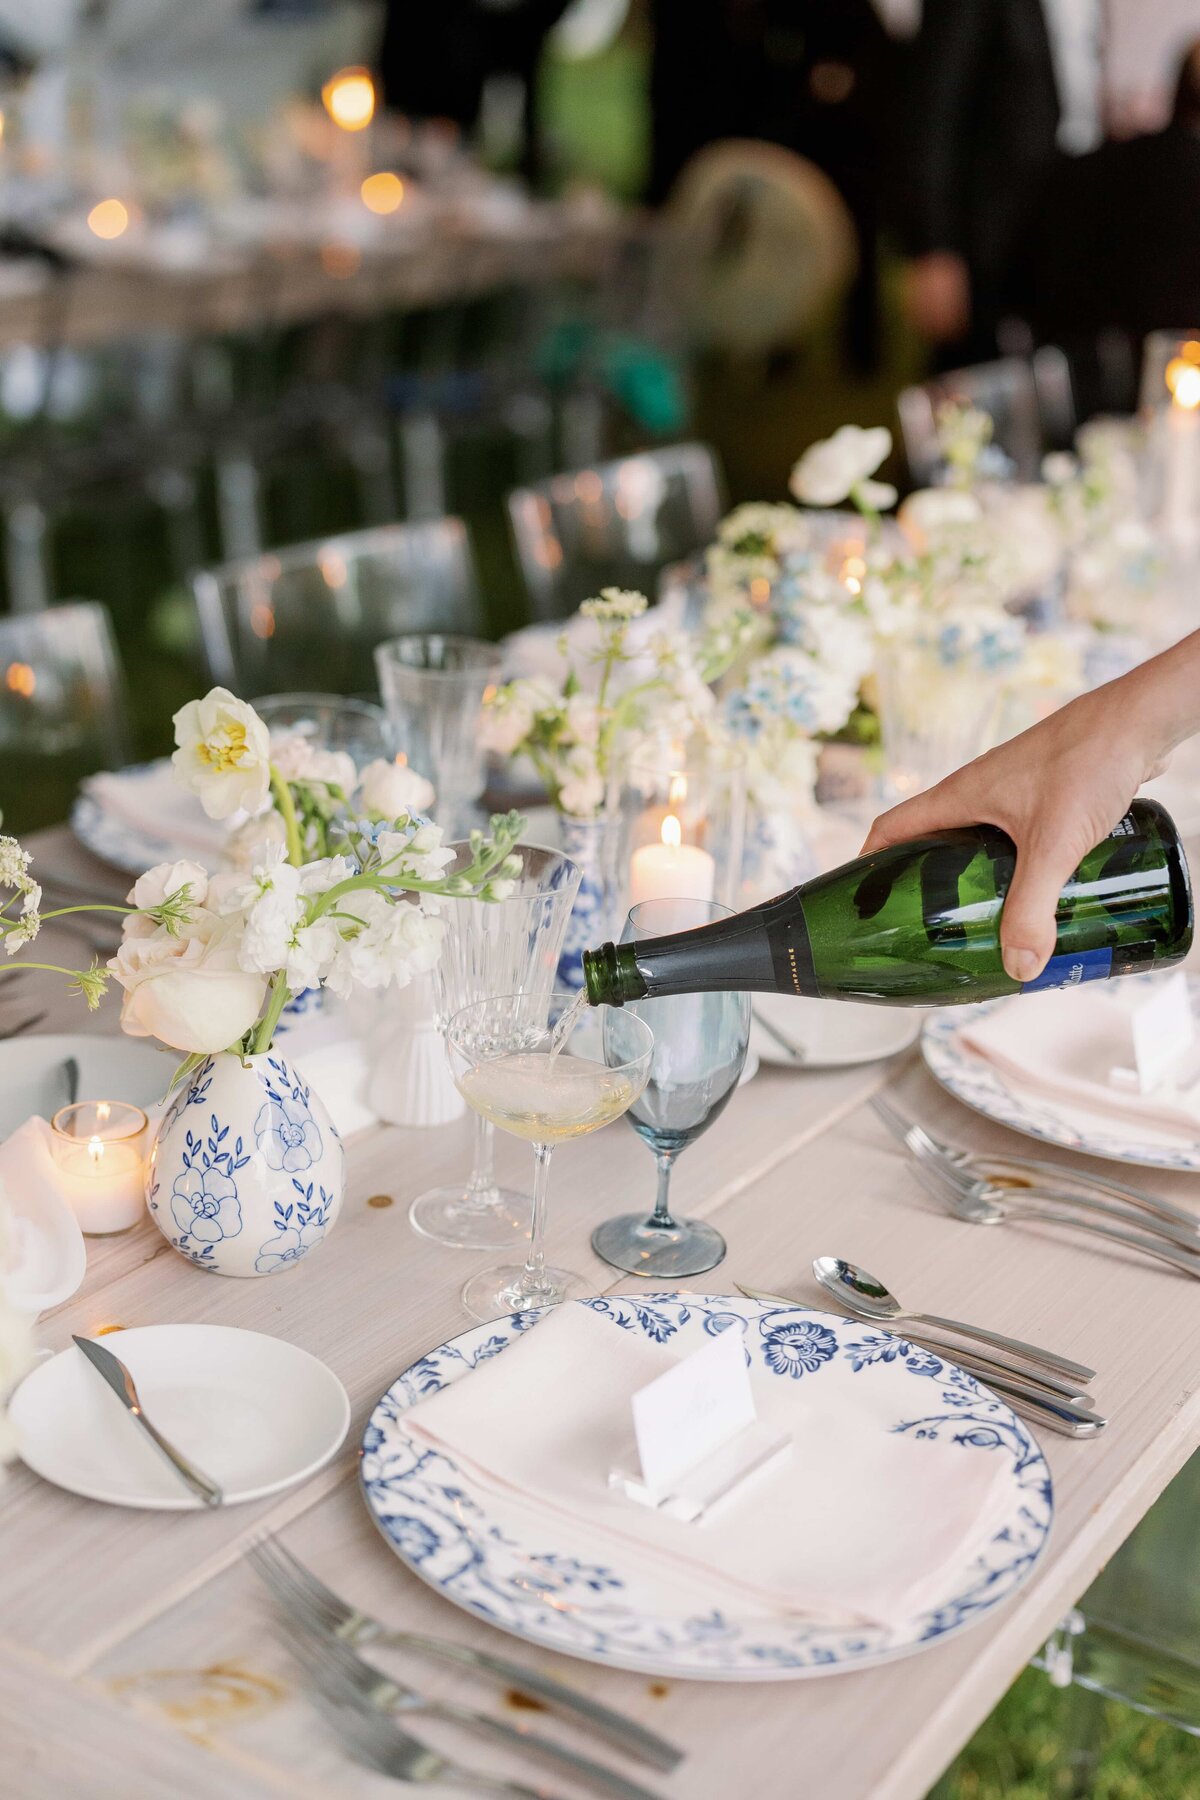 Estate Tent Wedding Reception New England - Cru and Co Events